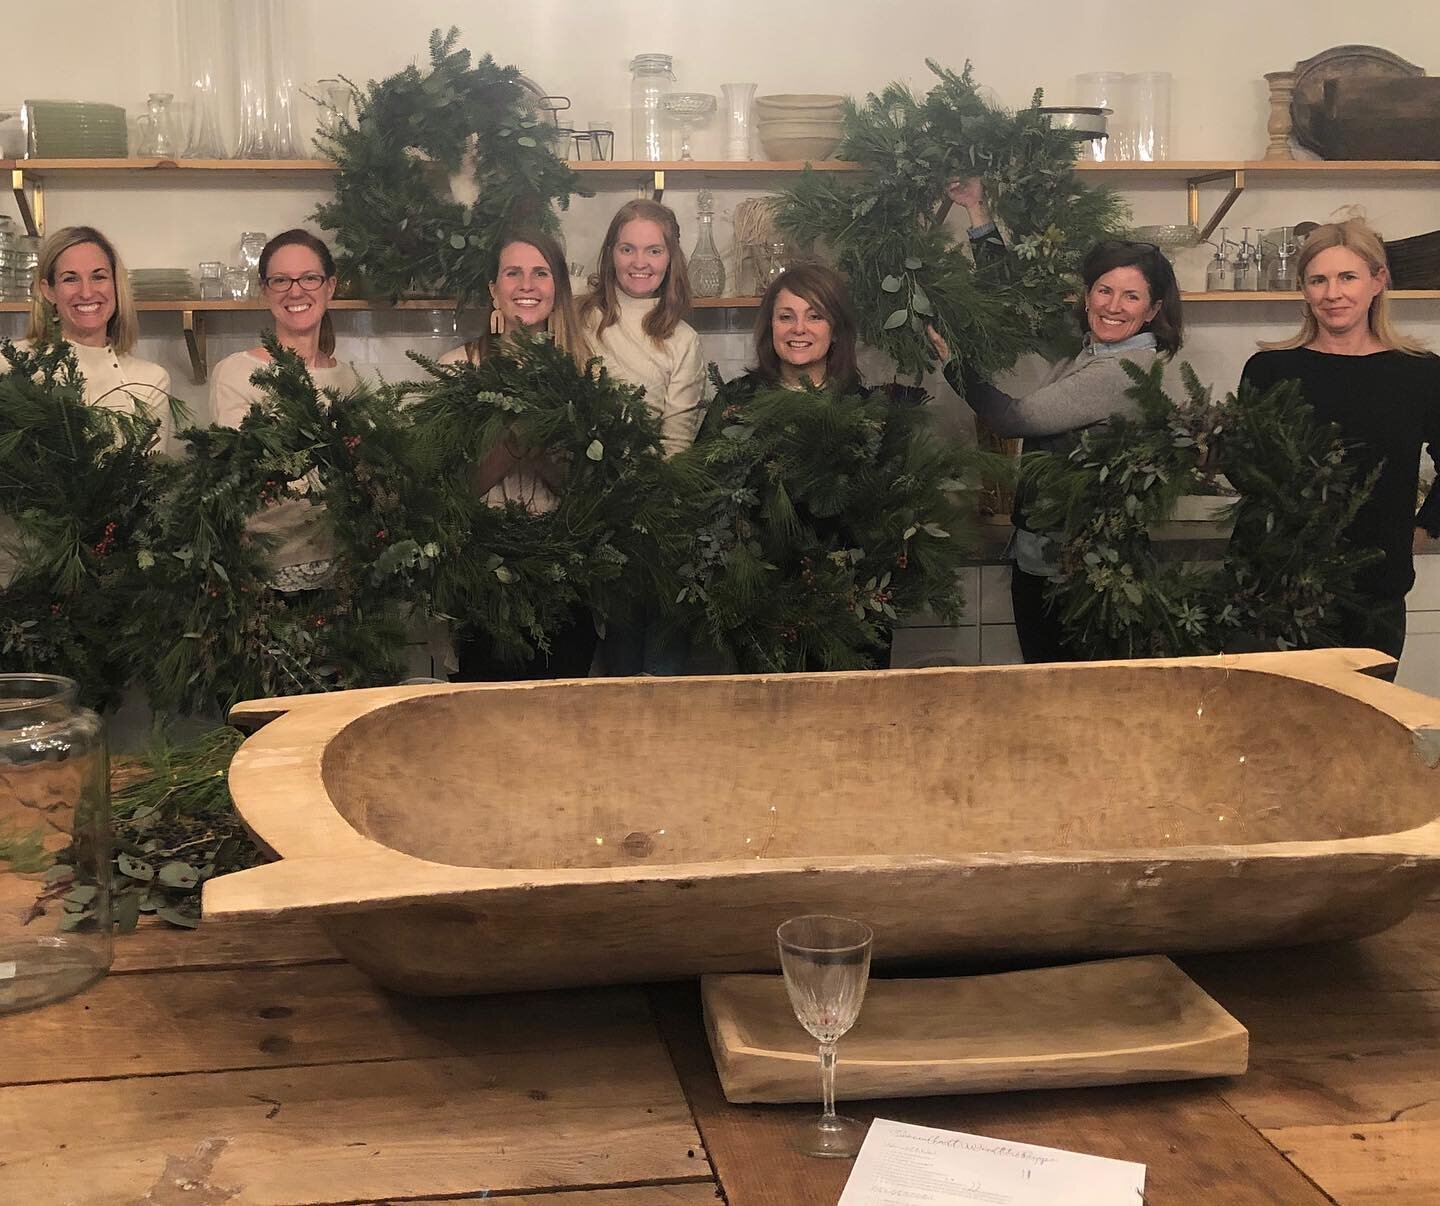 Hey local friends- is anyone interested in a wreath making workshop this December? Had a daydream of hosting a small group on our new property for some wreath making and coffee talk. Will you let us know in the comments? Thinking first Friday in Dece